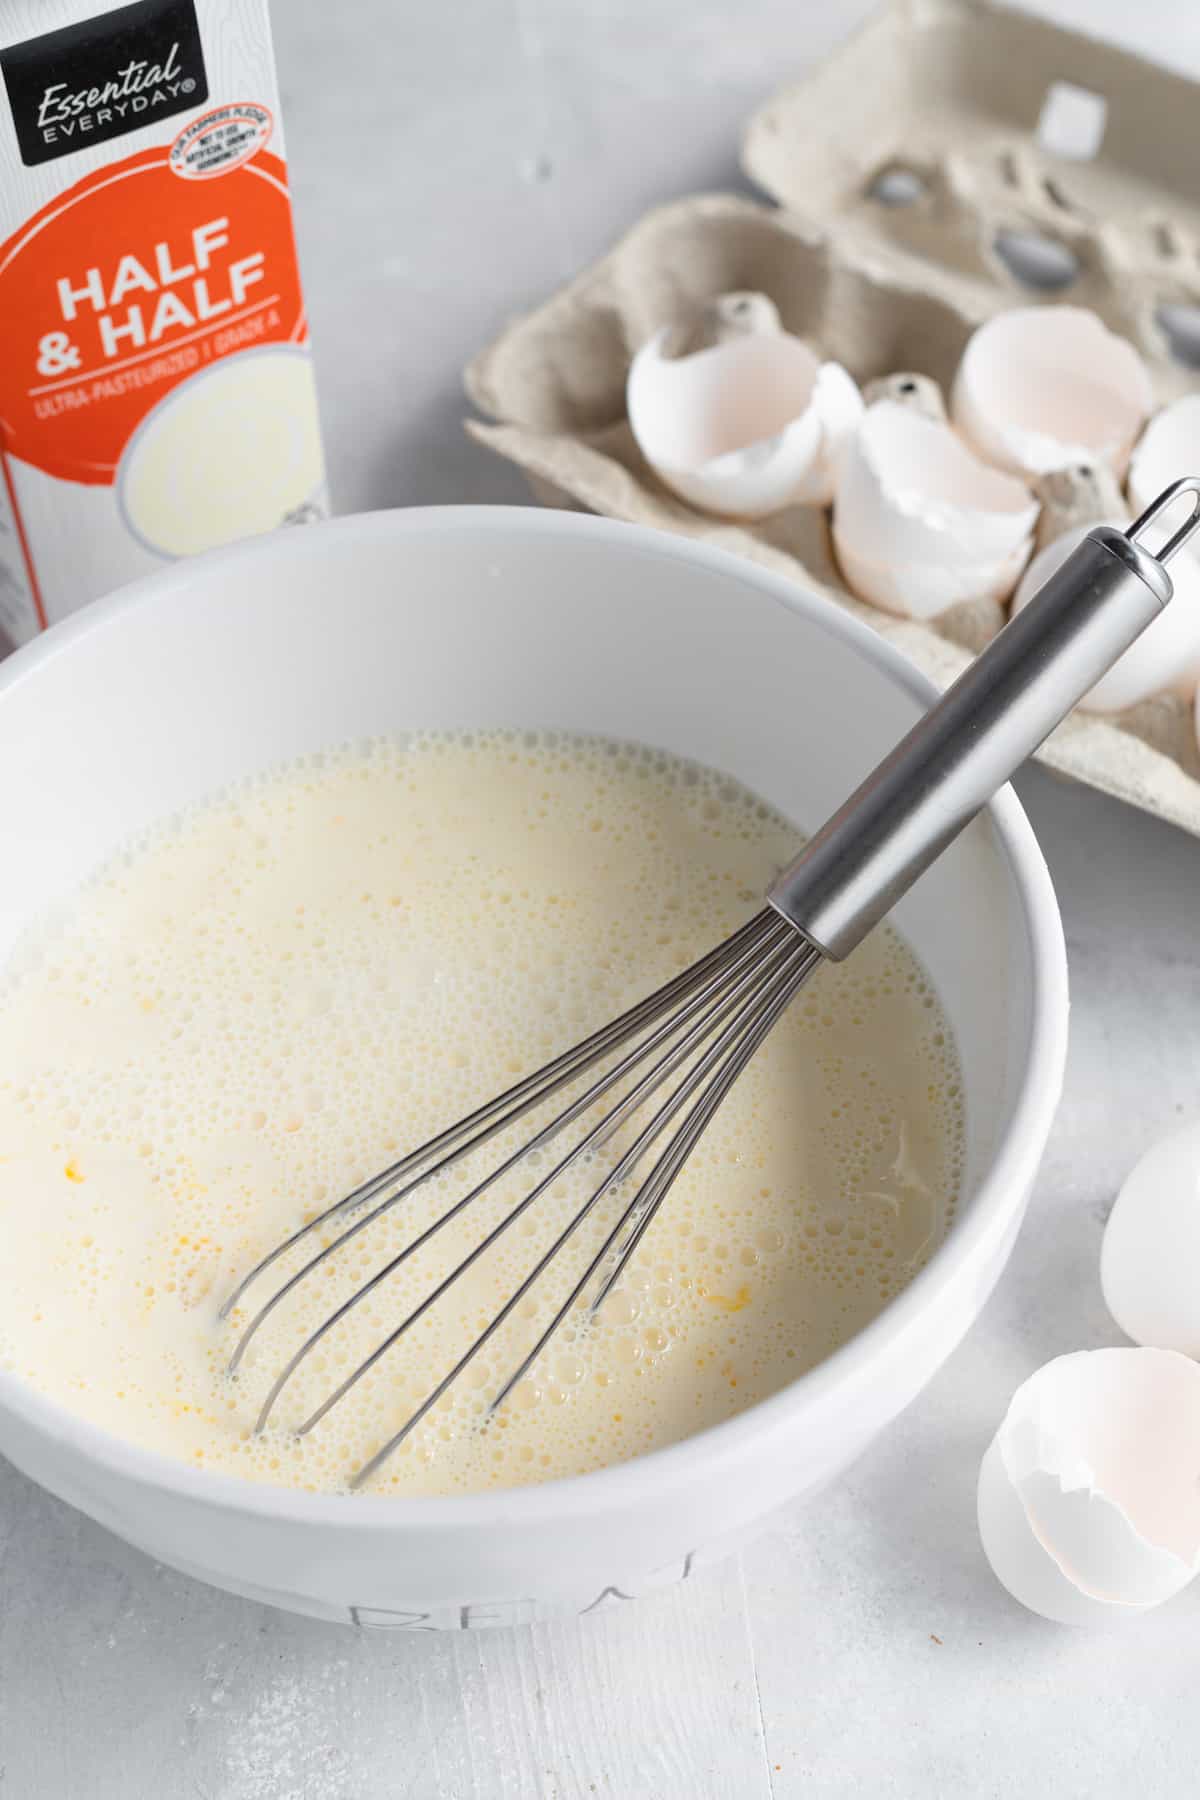 The Egg Mixture in a White Bowl with a Metal Whisk and Egg Shells in the Background